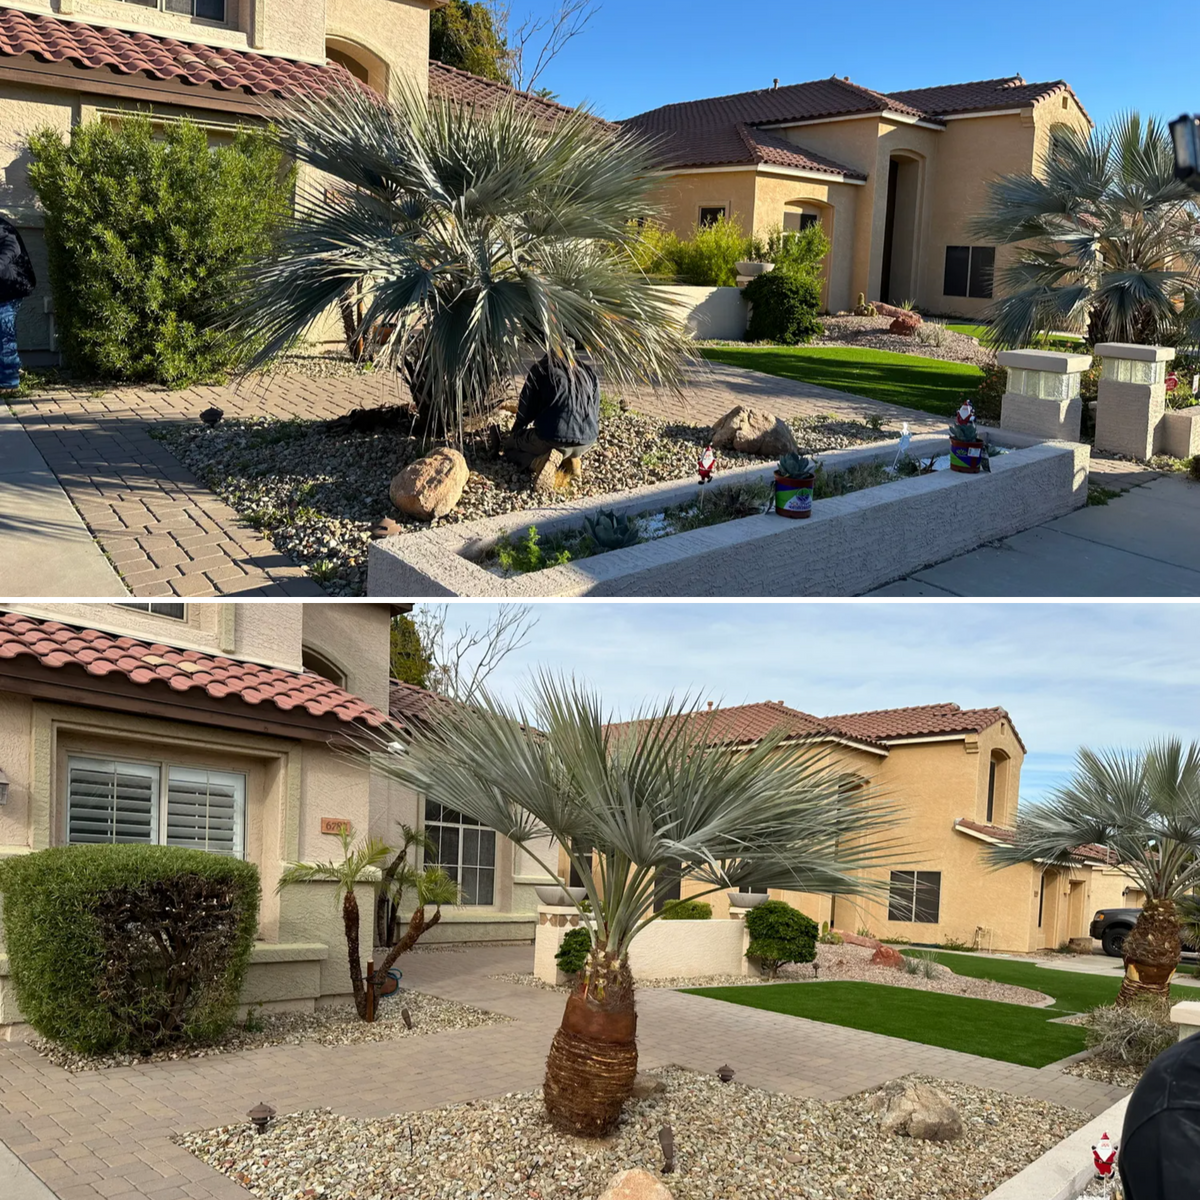 Lawn Maintenance for Bobbys Palm and Tree Service LLC in Surprise, AZ